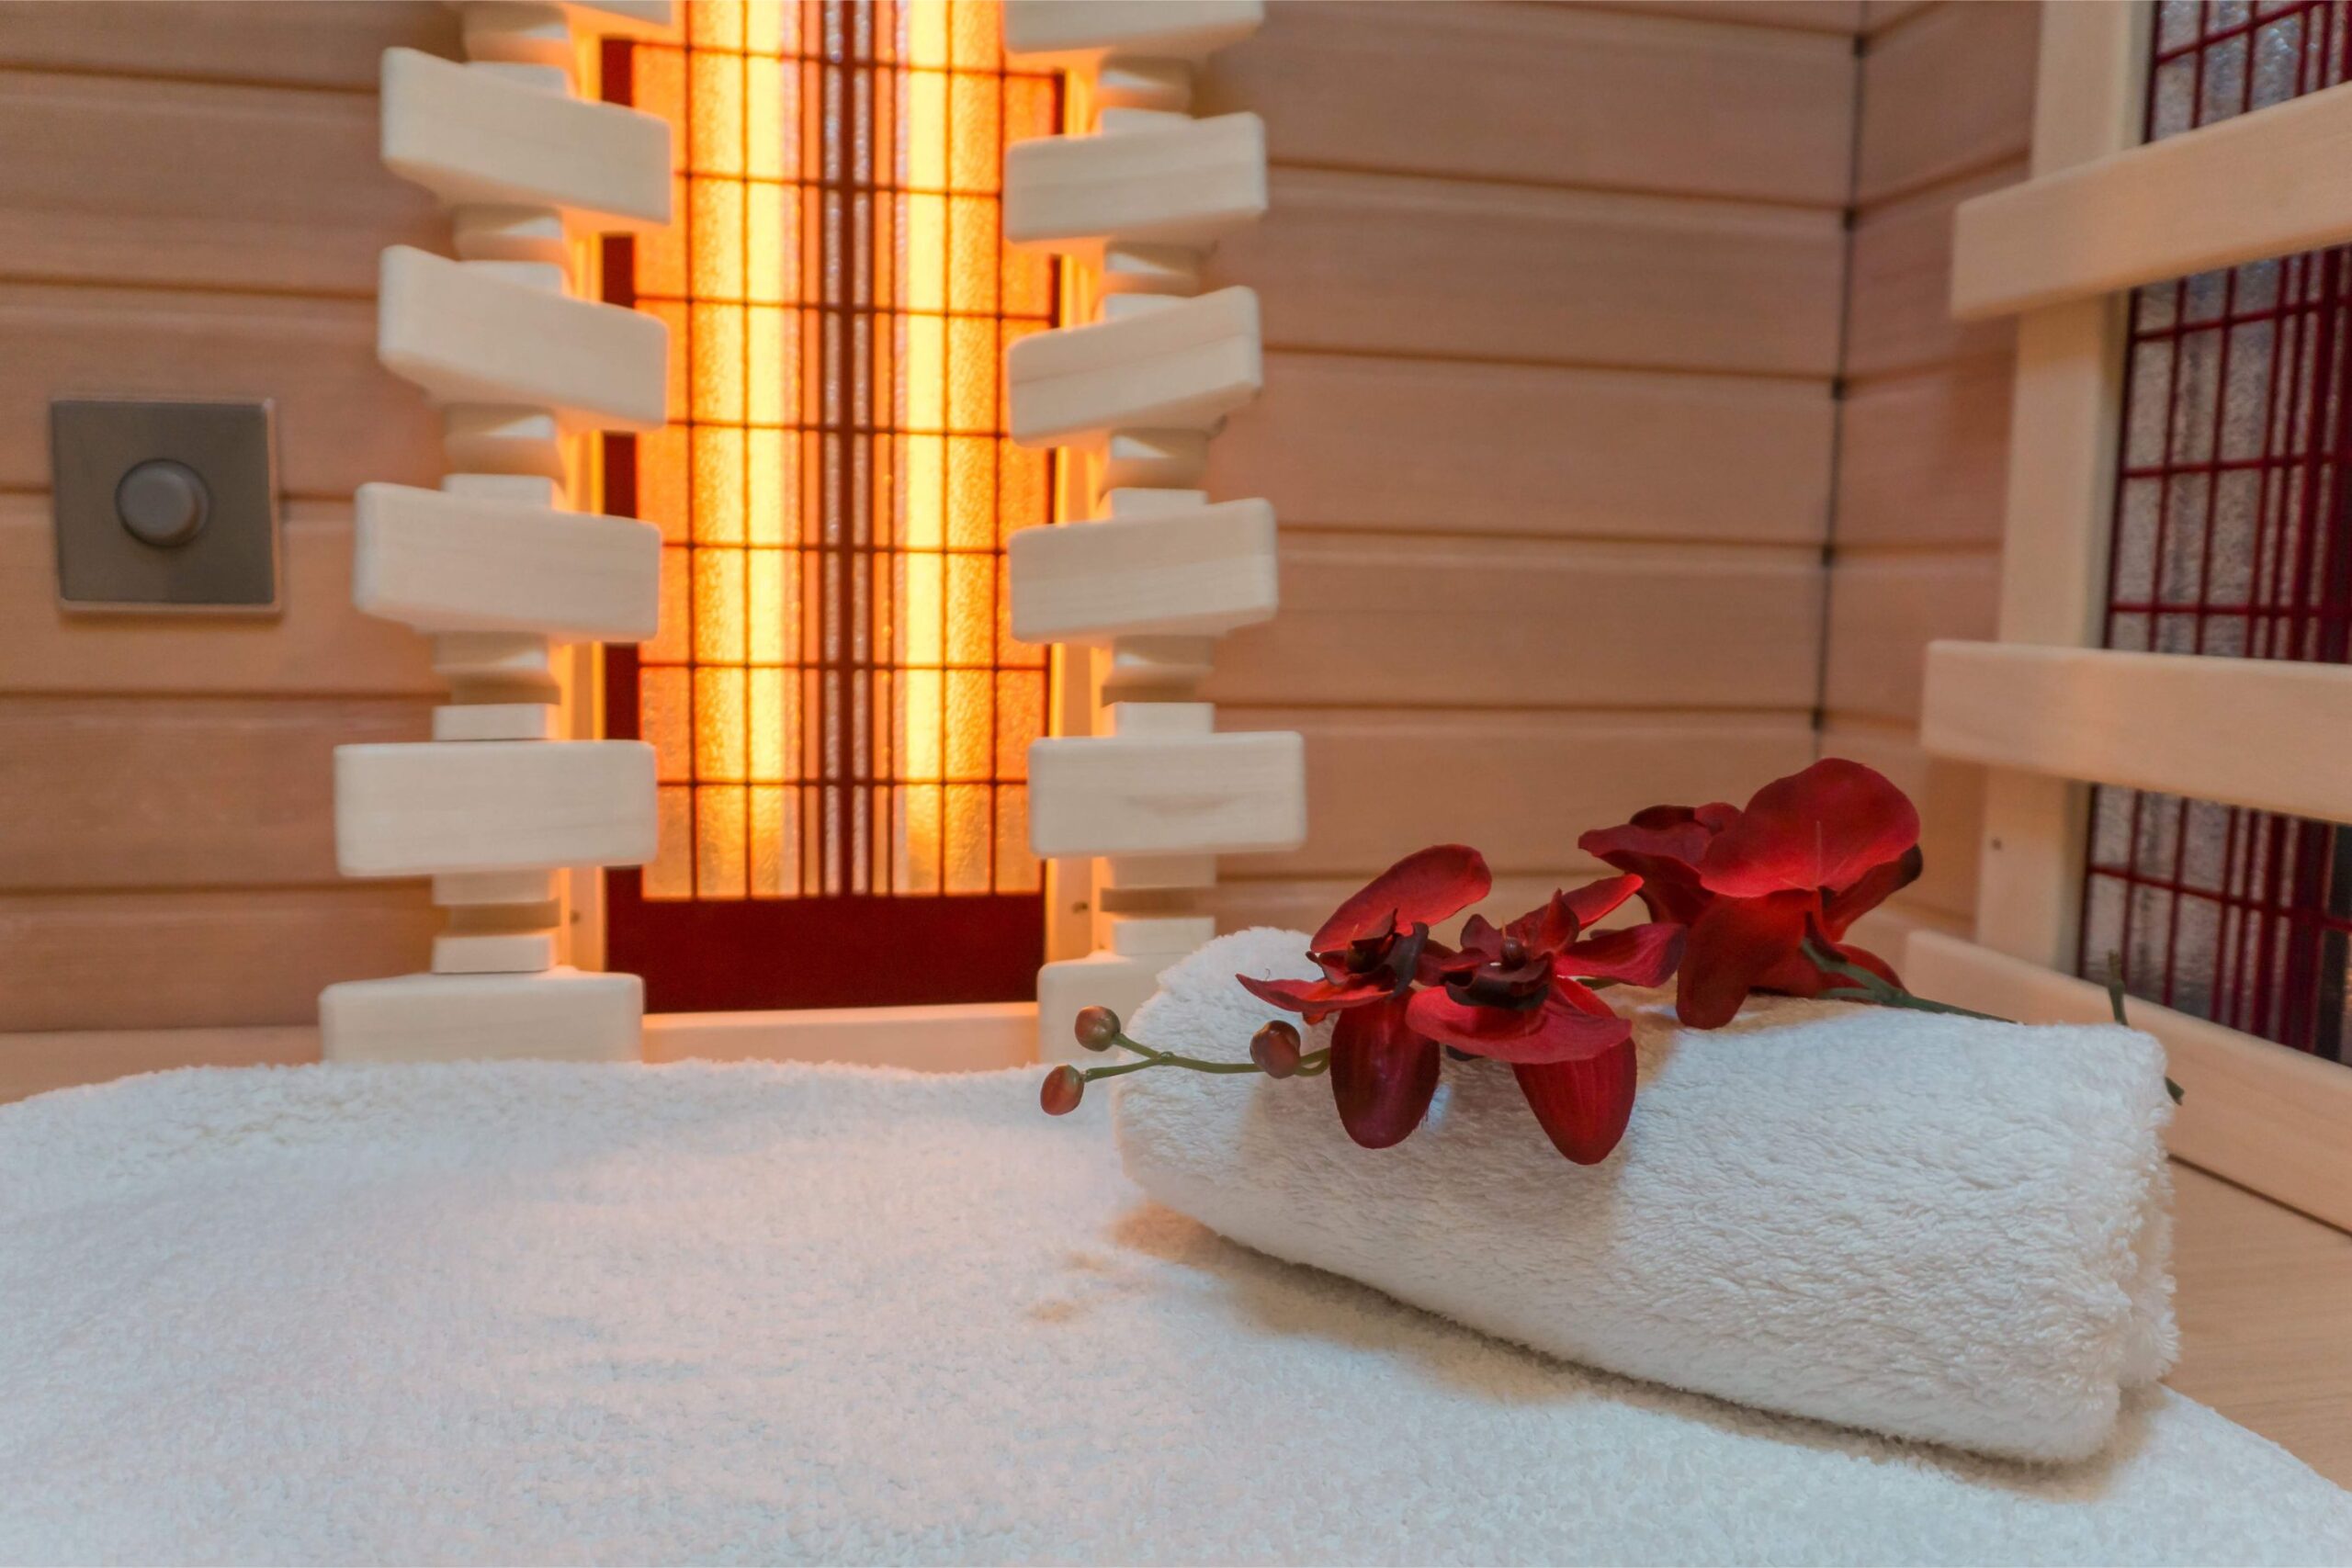 Use Light For Mood Enhancement This Winter: Infrared Sauna & Chromotherapy